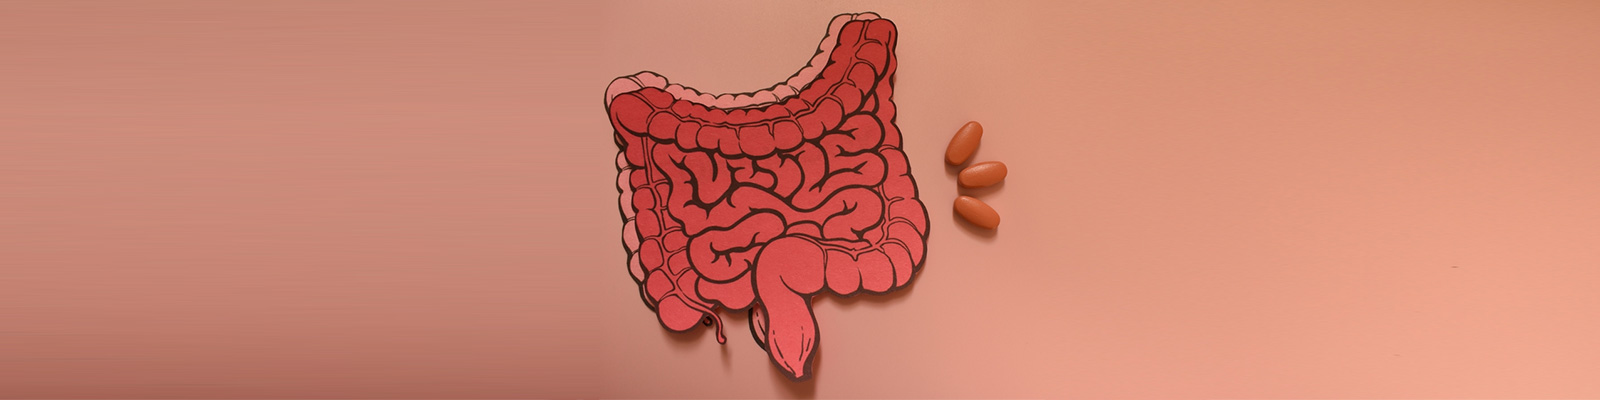 Crohn’s Disease and Life Expectancy: How Vicious It Can Be?